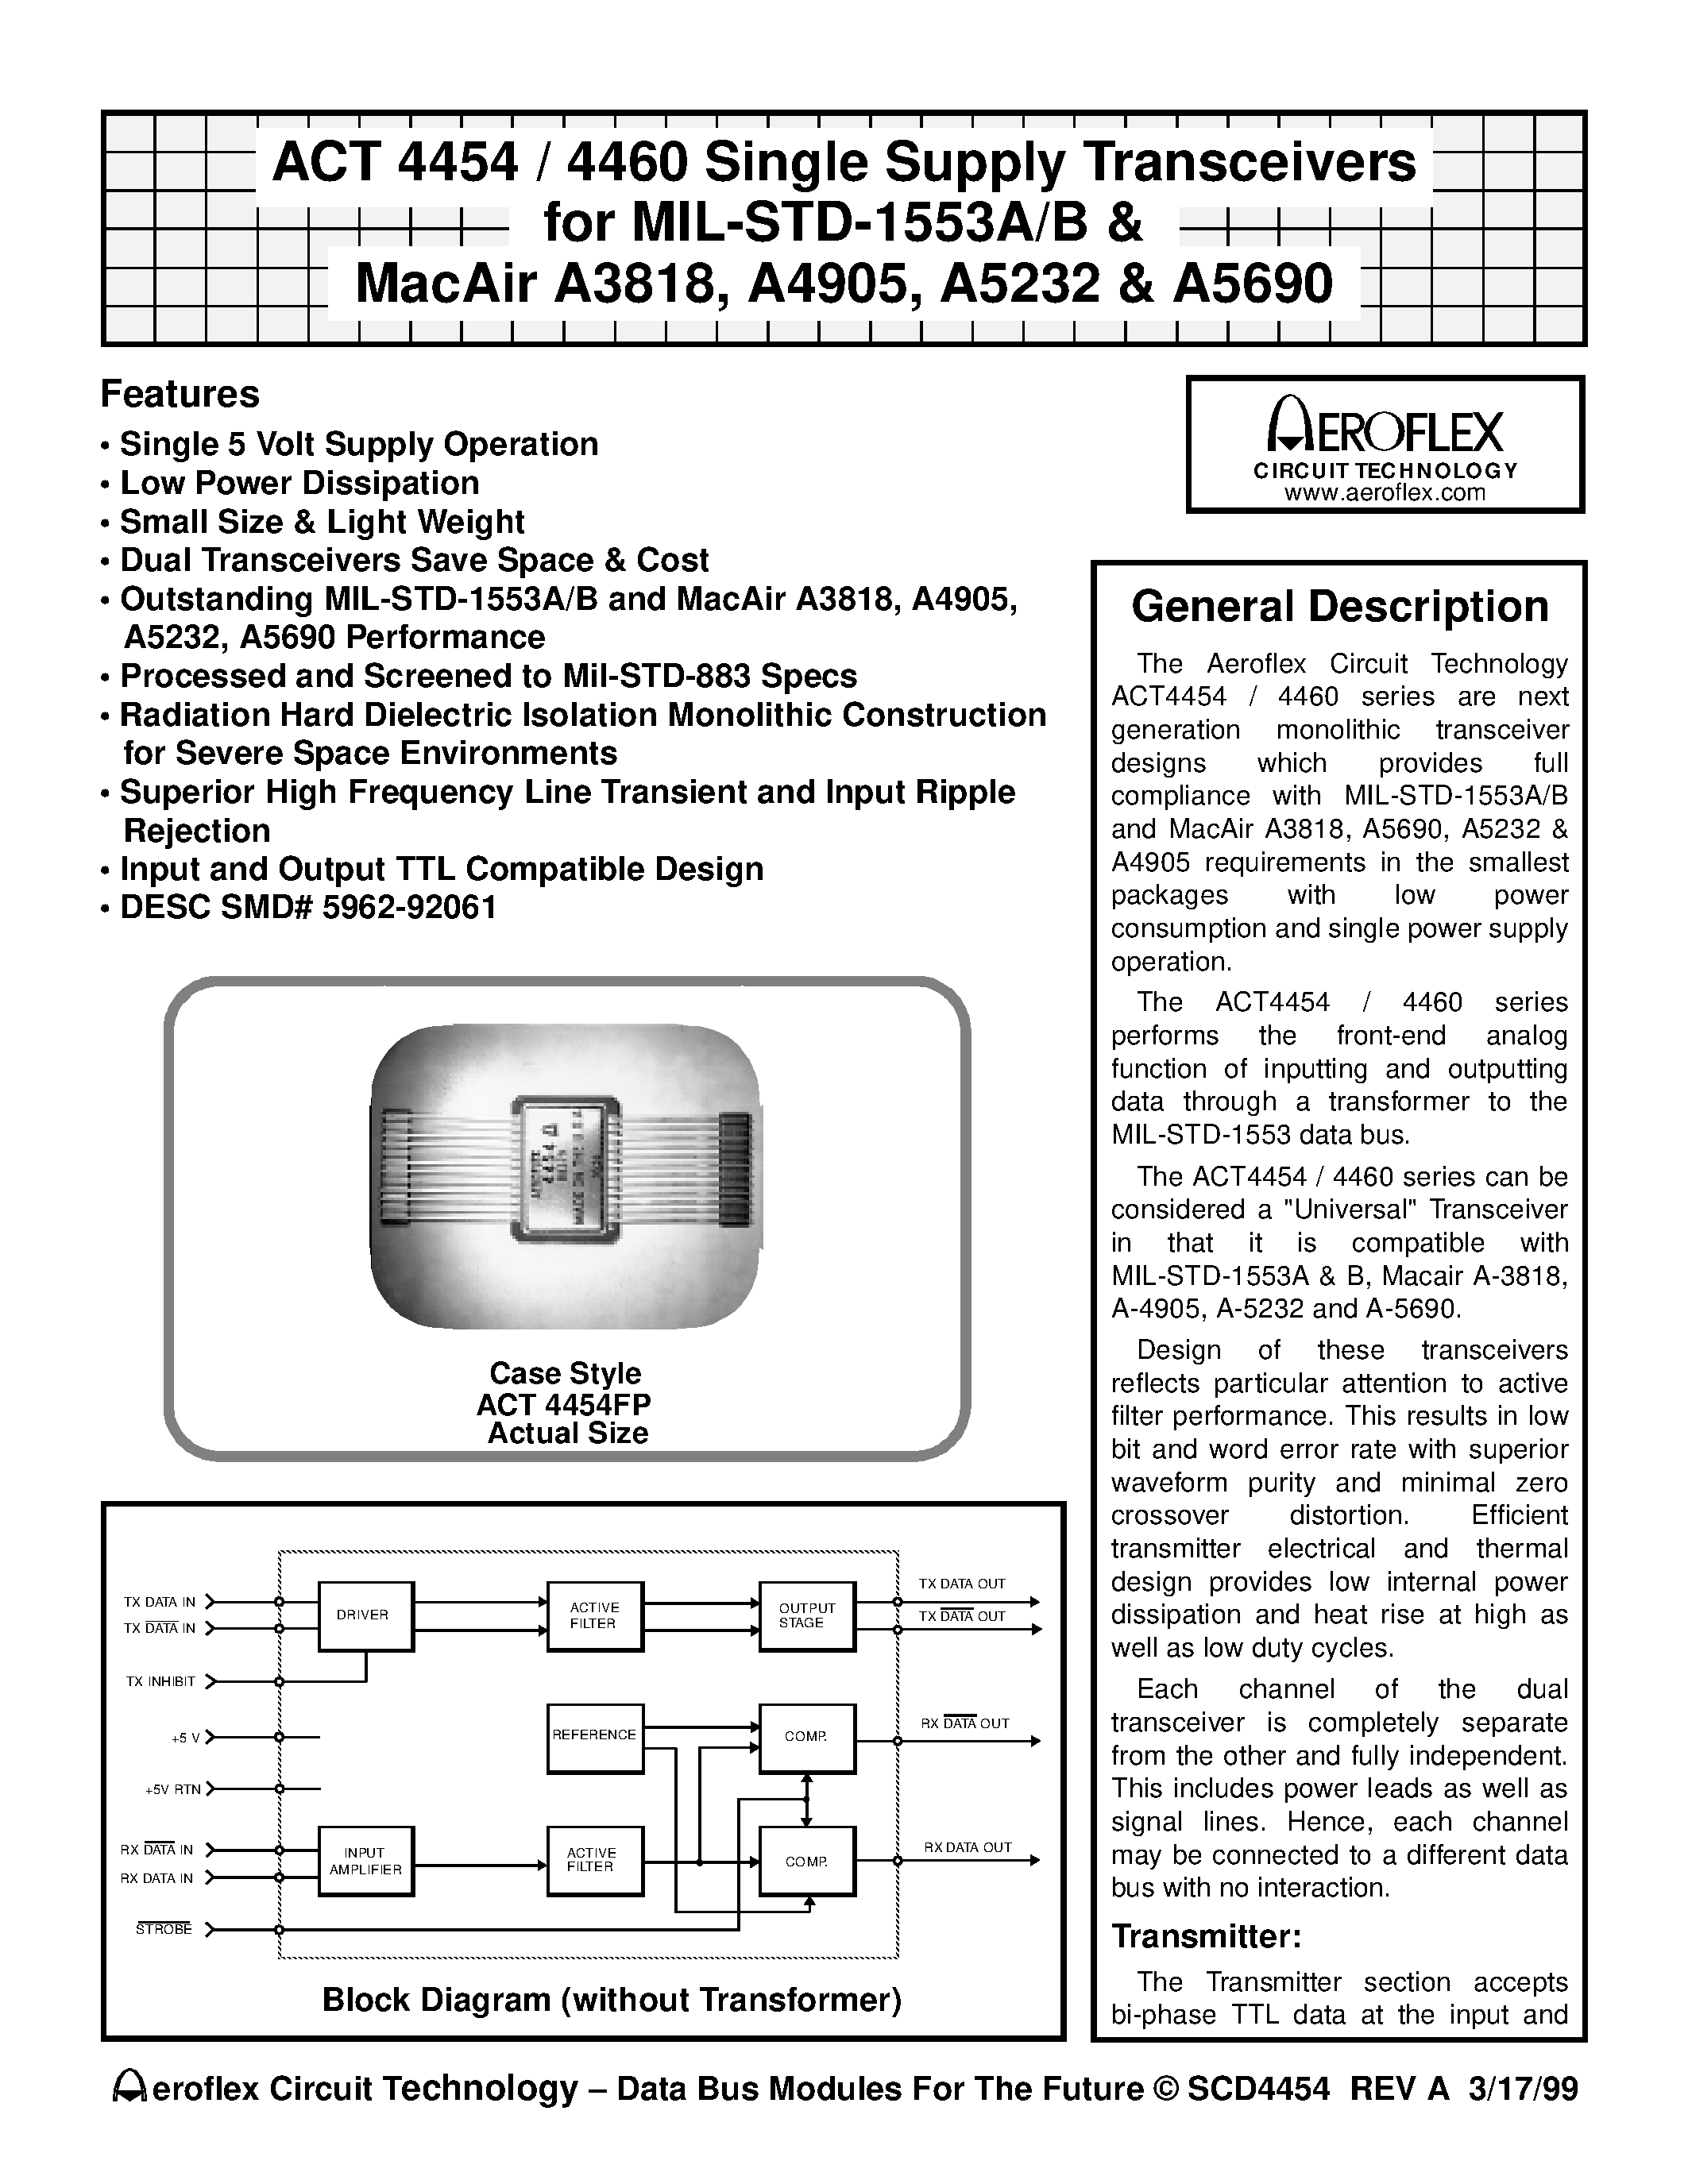 Datasheet ACT4460 - ACT 4454 / 4460 Single Supply Transceivers for MIL-STD-1553A/B & MacAir A3818/ A4905/ A5232 & A5690 page 1